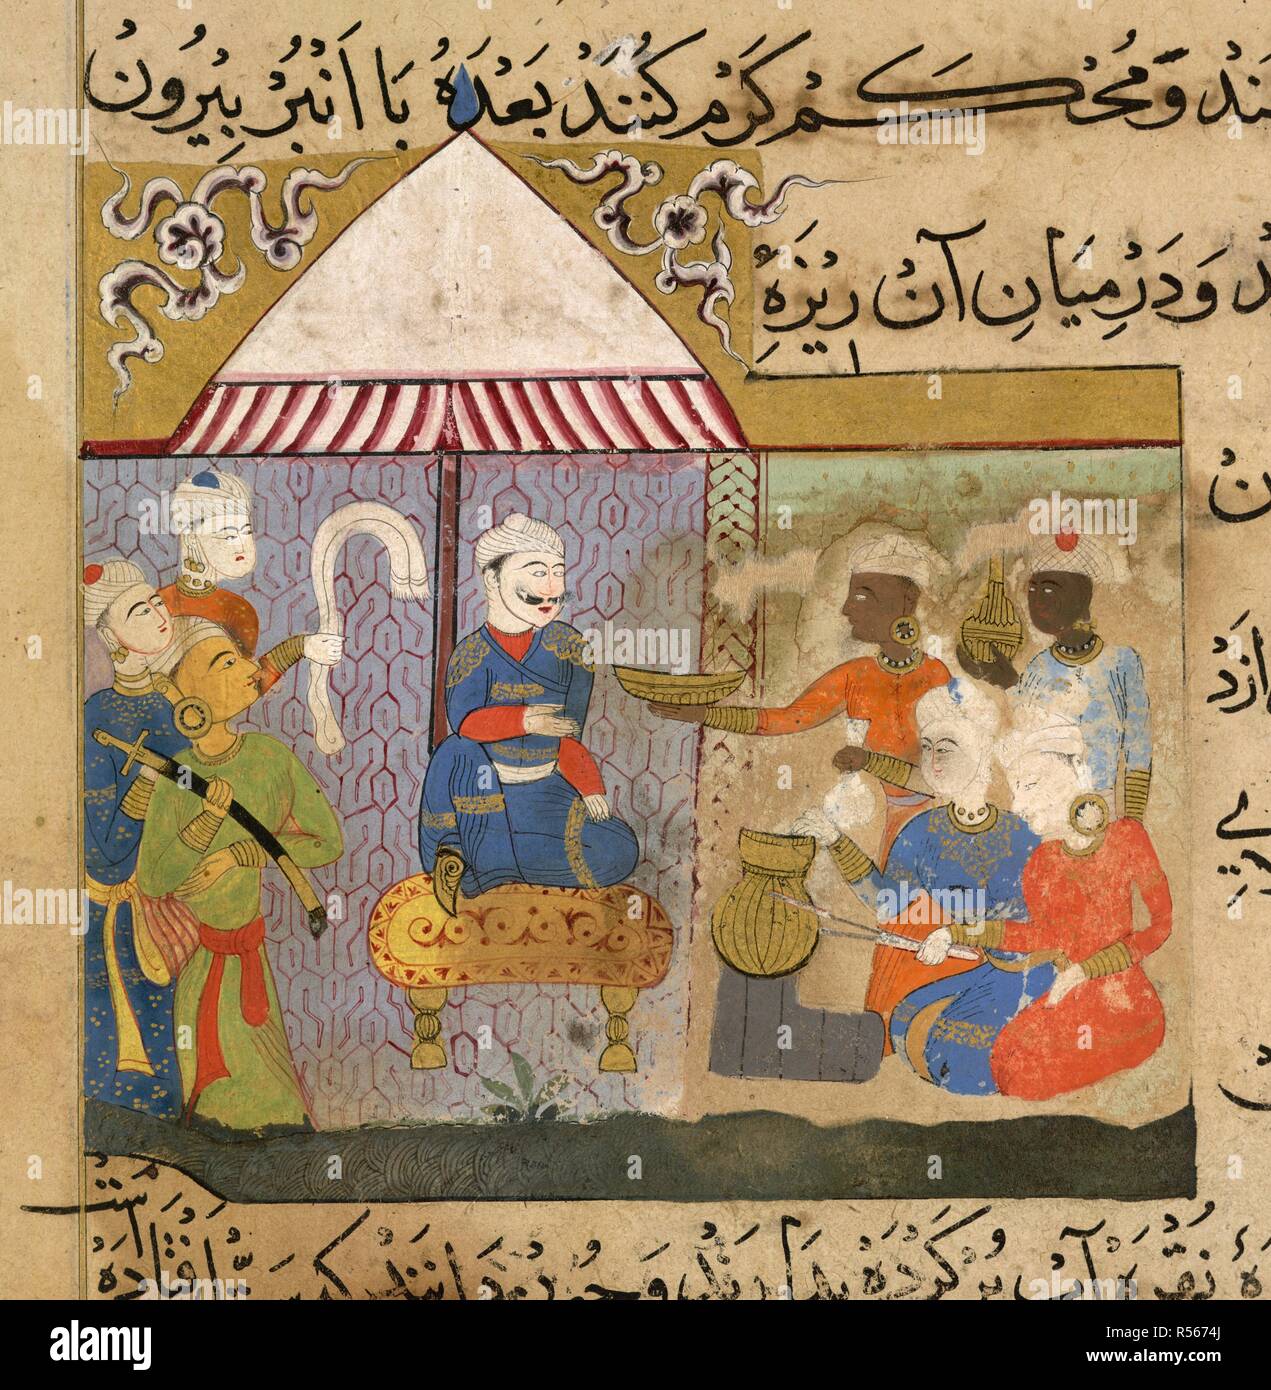 Preparation of frankincense. The Ni'matnama-i Nasir al-Din Shah. A manuscript o. 1495 - 1505. Preparation of frankincense for the Sultan Ghiyath al-Din. Opaque watercolour. Sultanate style.  Image taken from The Ni'matnama-i Nasir al-Din Shah. A manuscript on Indian cookery and the preparation of sweetmeats, spices etc.  Originally published/produced in 1495 - 1505. . Source: I.O. ISLAMIC 149, f.174v. Language: Persian. Stock Photo